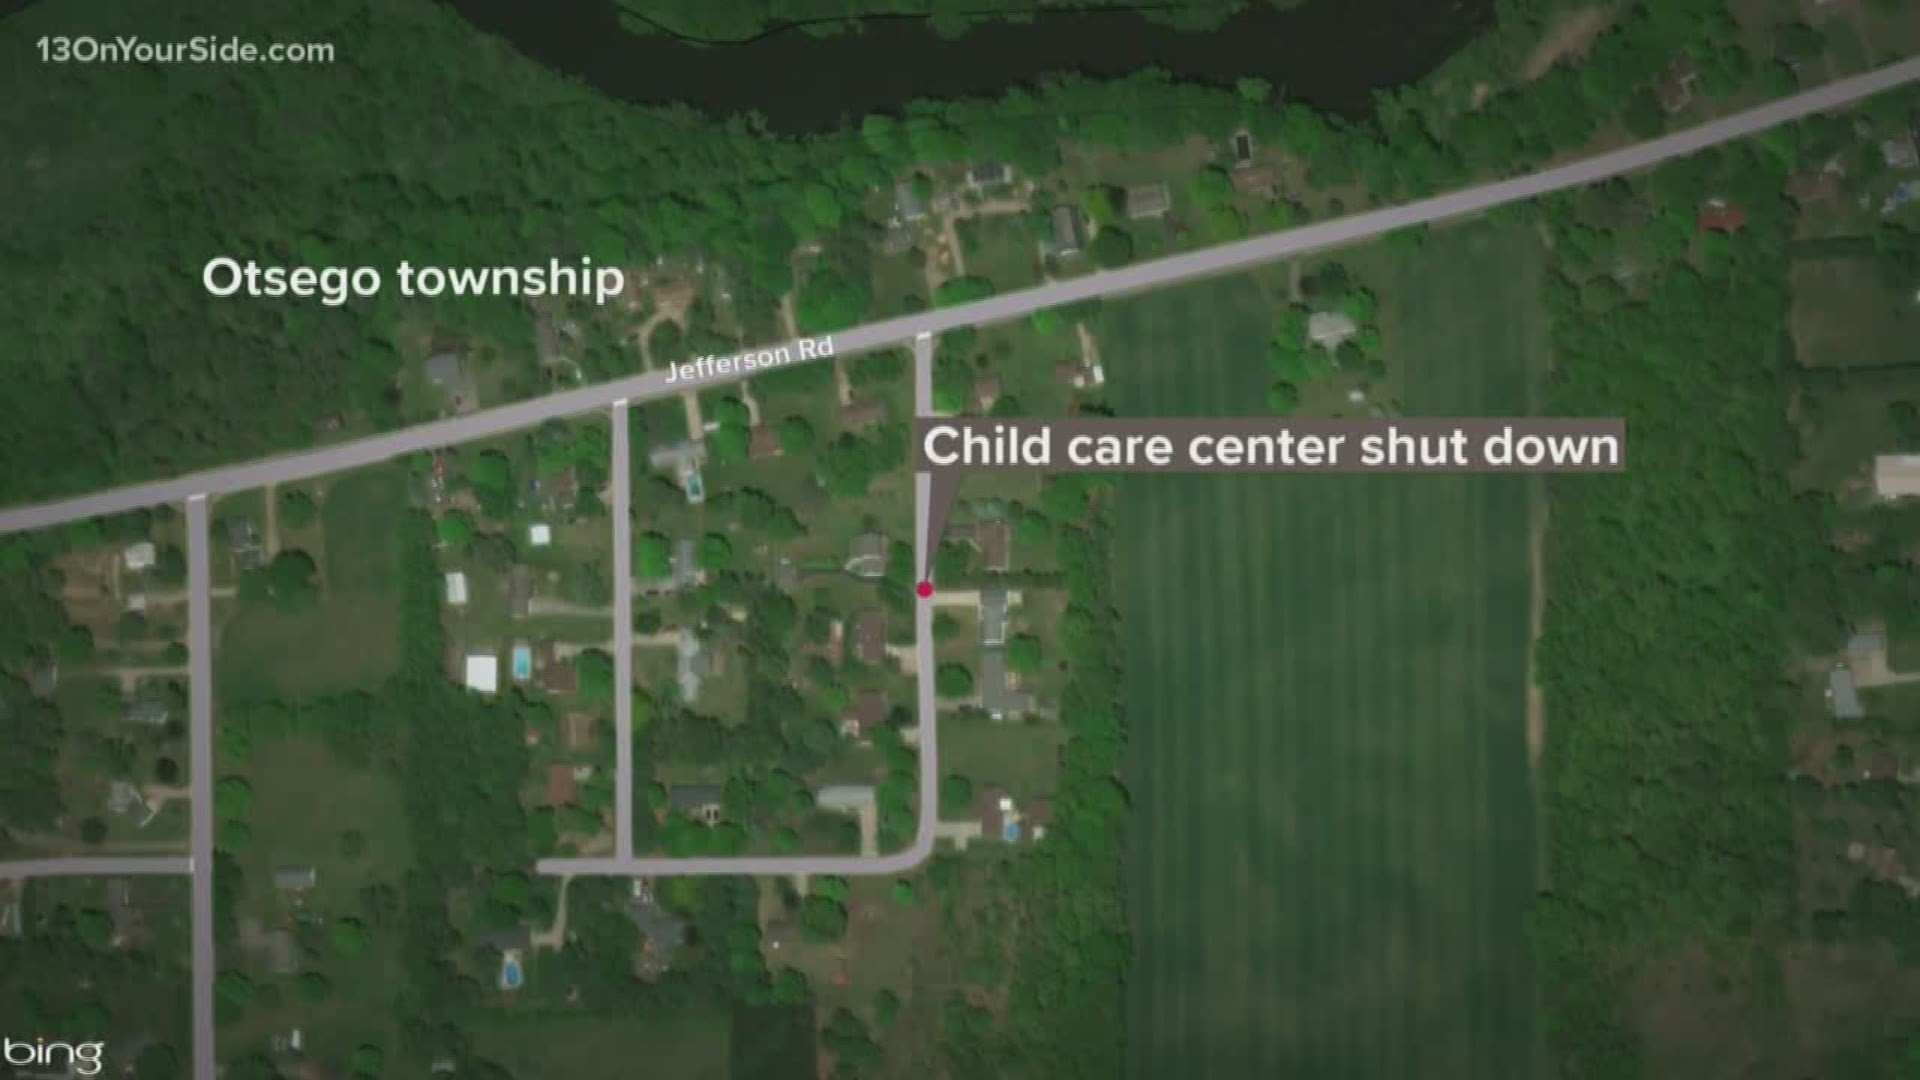 State officials have ordered an Otsego day care center to shut down while they investigate abuse allegations.